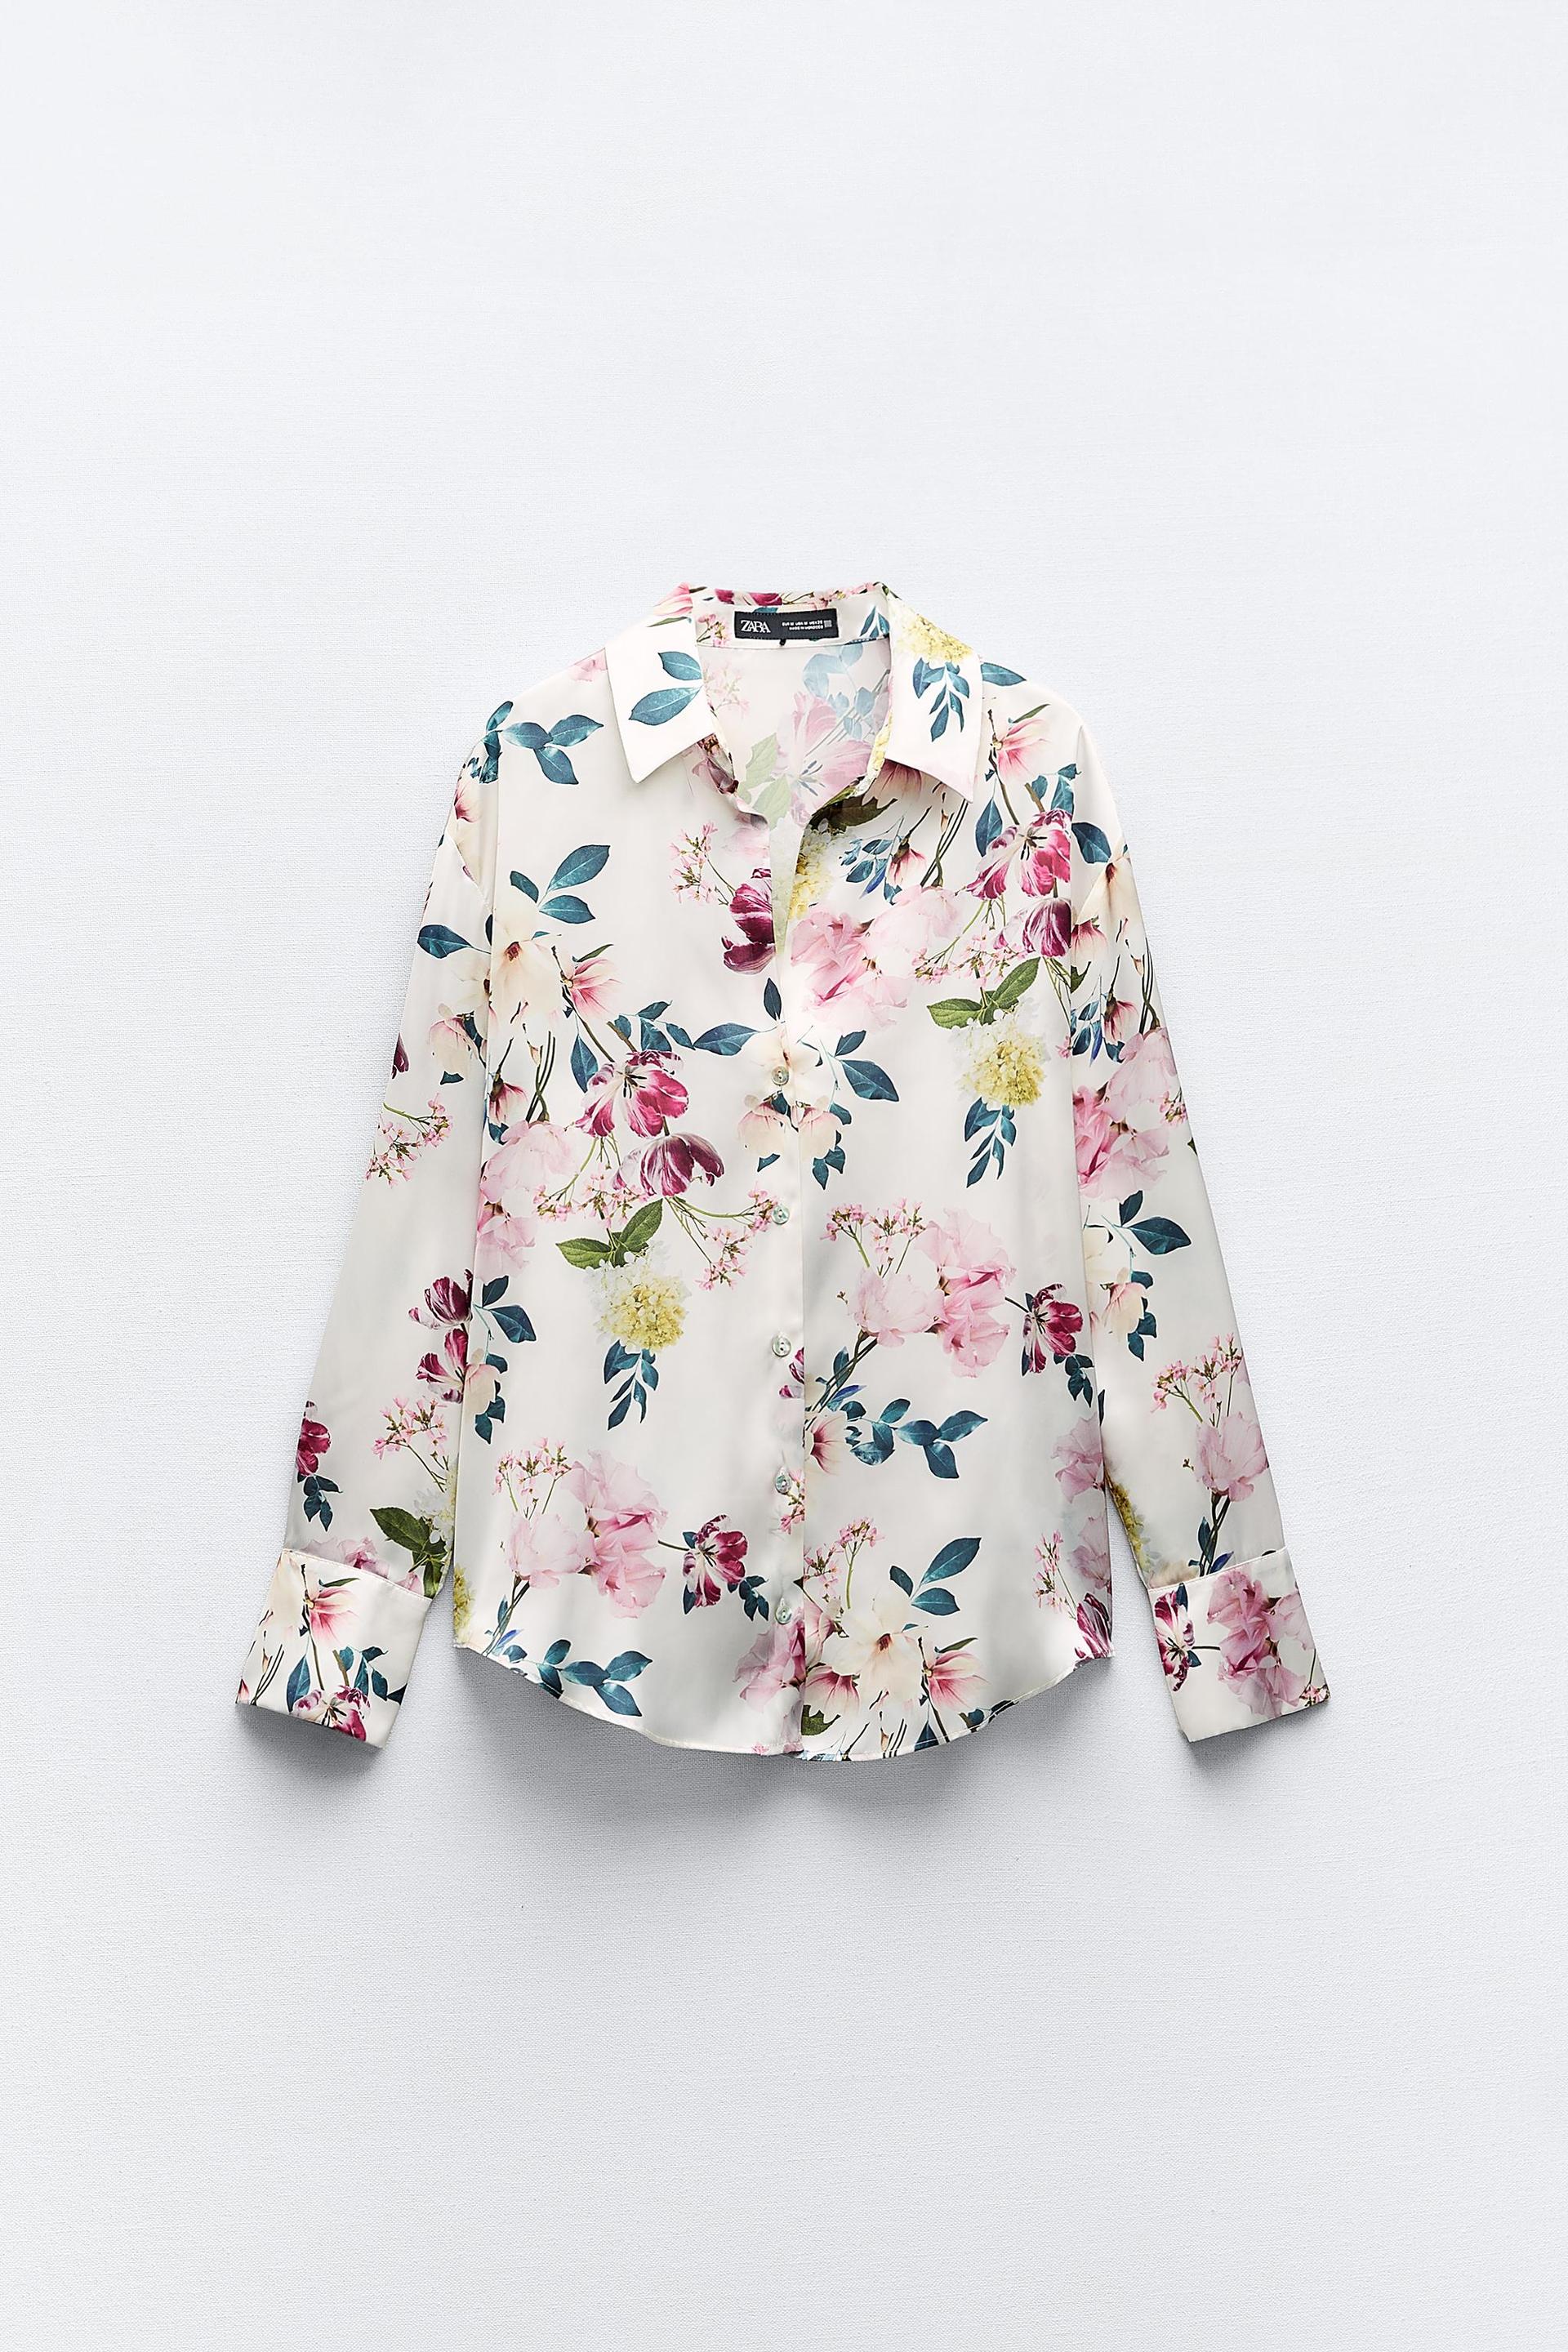 NWT ZARA SATIN EFFECT FLORAL SHIRT MULTICOLORED - REF 7969/235 size S